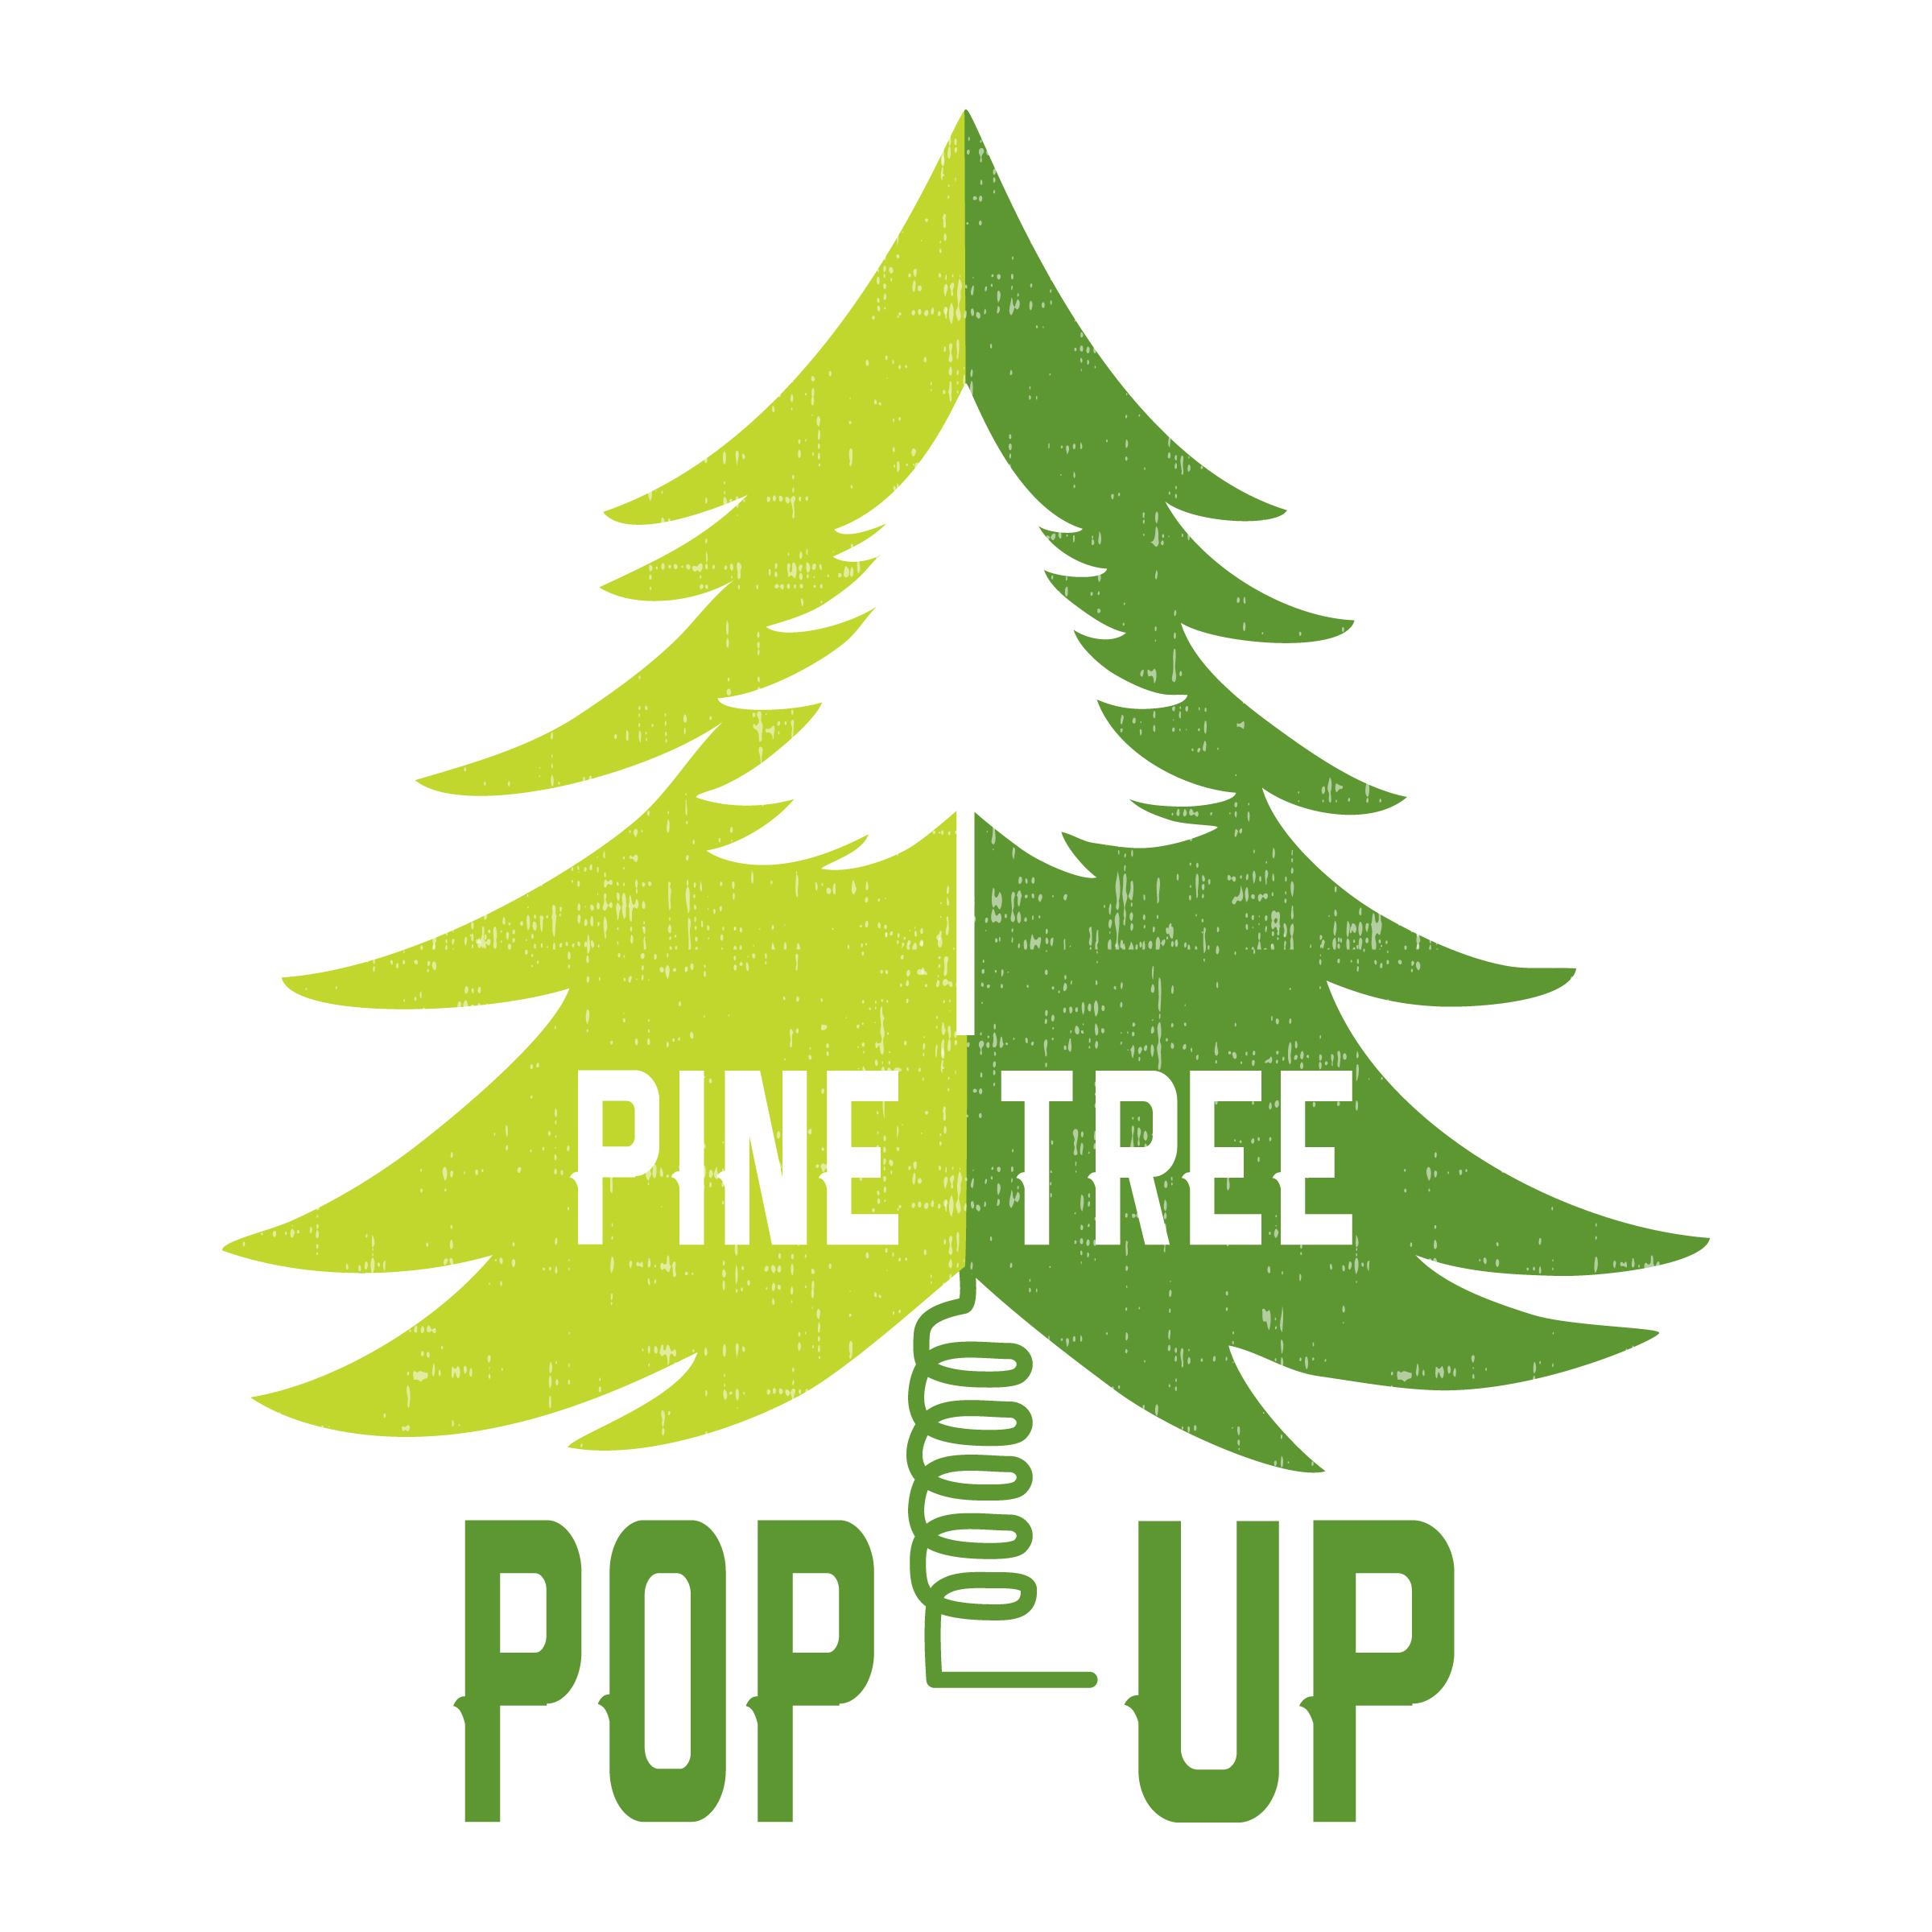 Pine Tree Maine Logo - Pine Tree Pop Up Will Be At Pop Up On Maine Art Hill At 5 Chase Hill